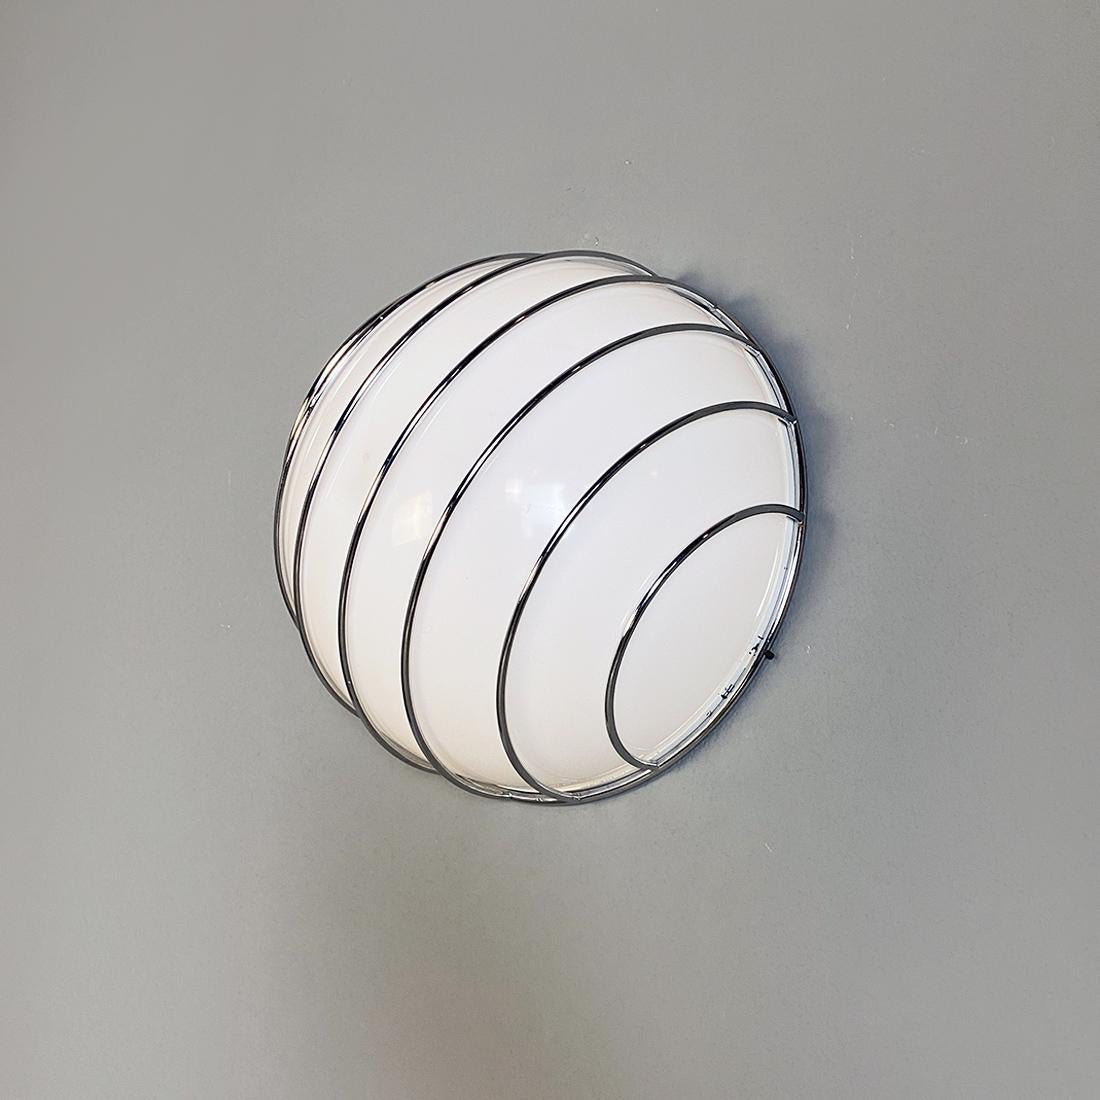 Italian Modern Metal Rod Structure and White Plastic Lampshade Wall Lamp, 1970s For Sale 9